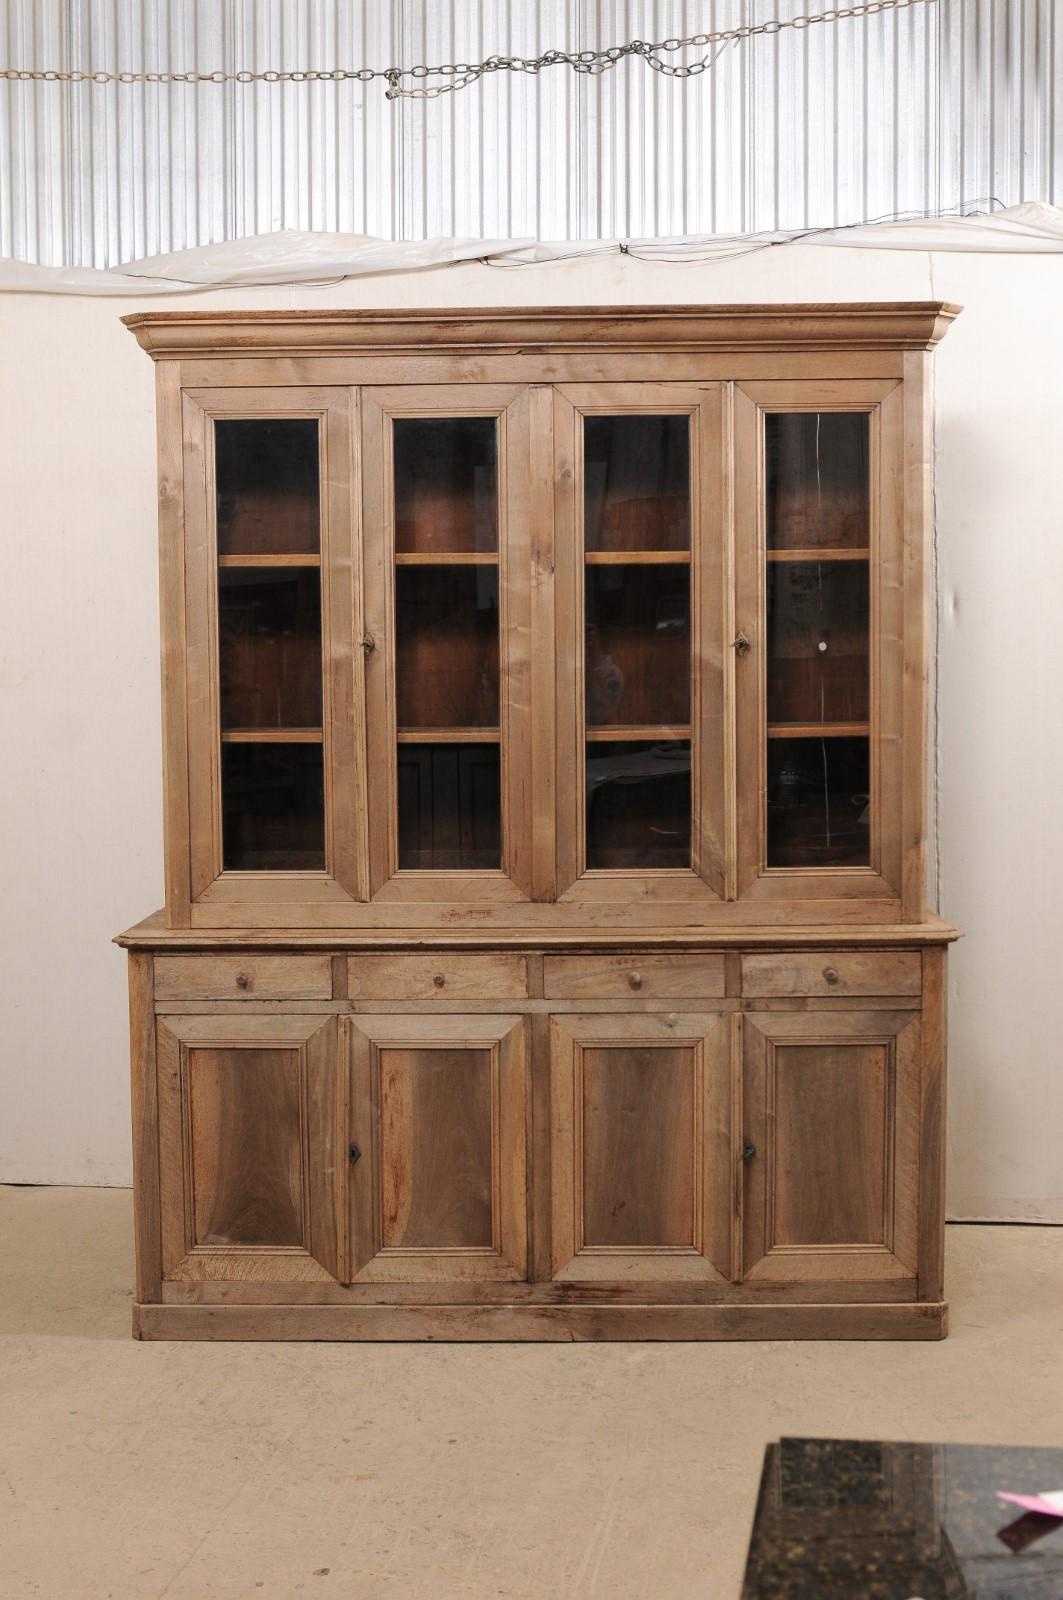 A French tall display and storage cabinet from the 19th century. This antique bleached-wood cabinet from France features a nicely molded cornice, crowning the upper cabinet which houses four glass front doors, and rests atop a lower case fitted with